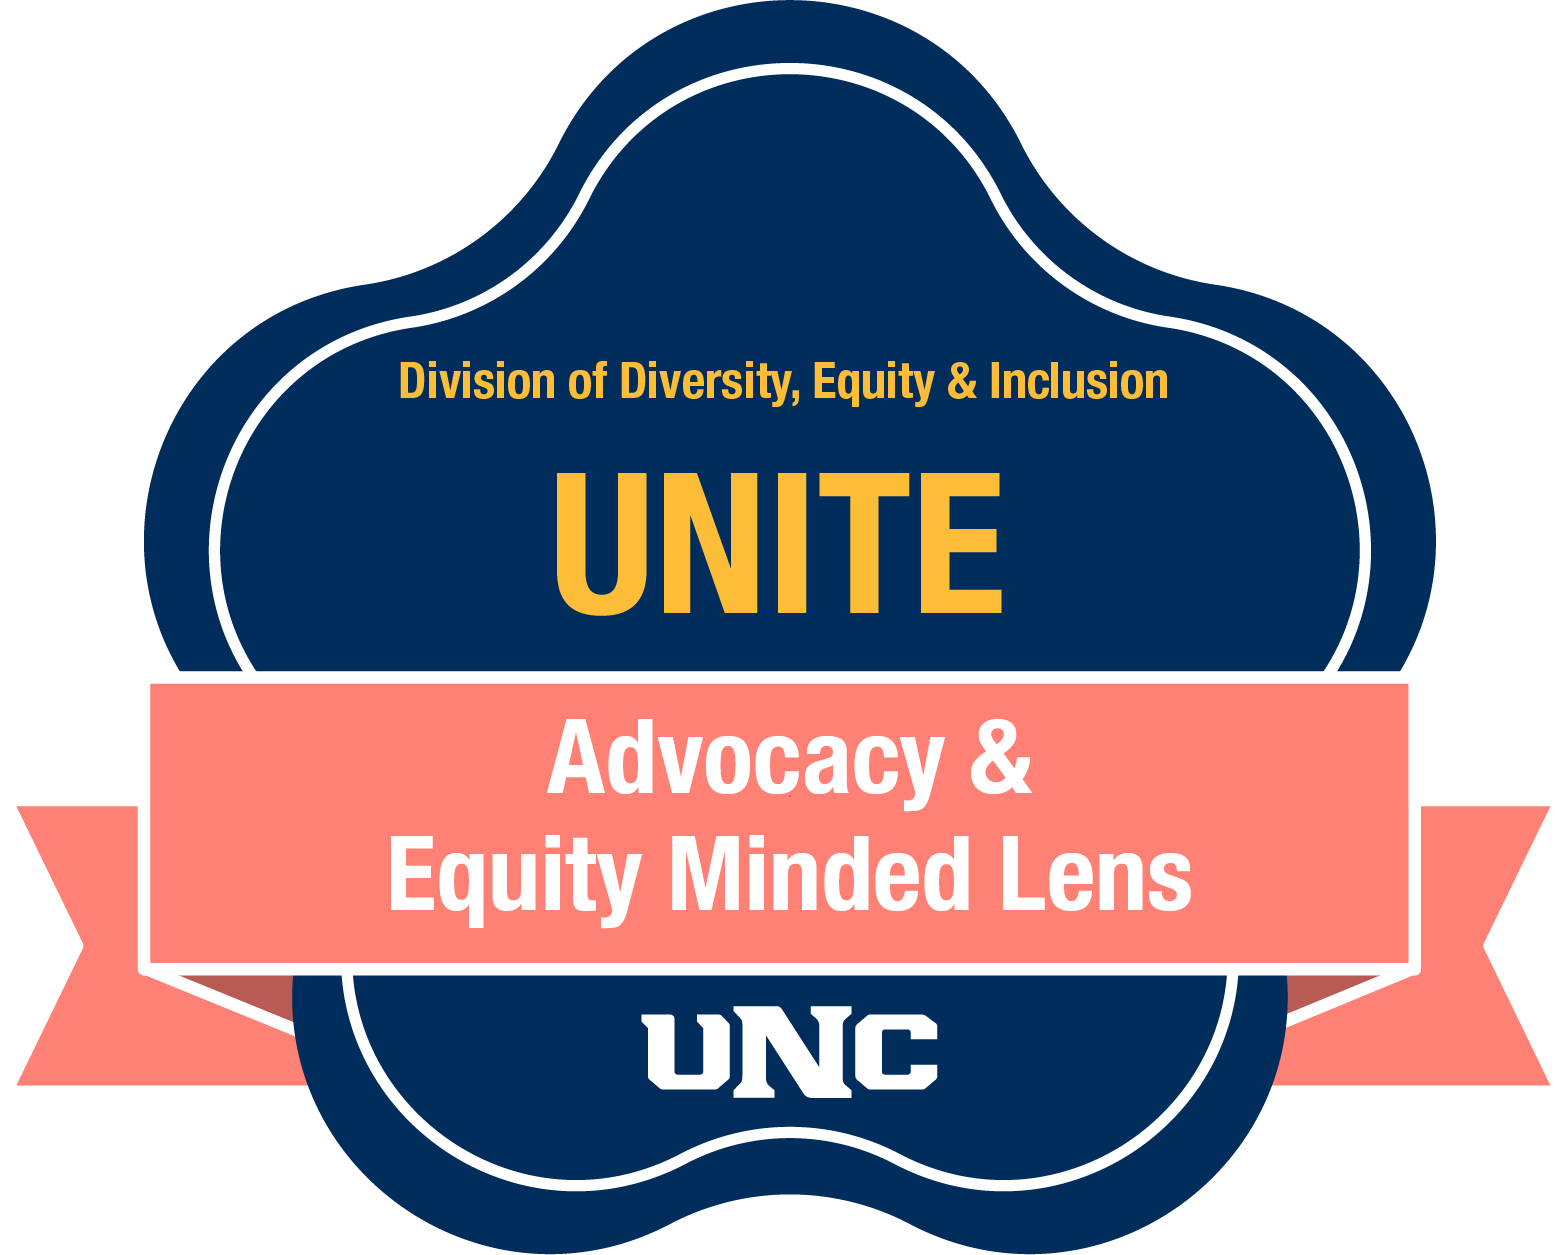 Advocacy & Equity Mind Lens